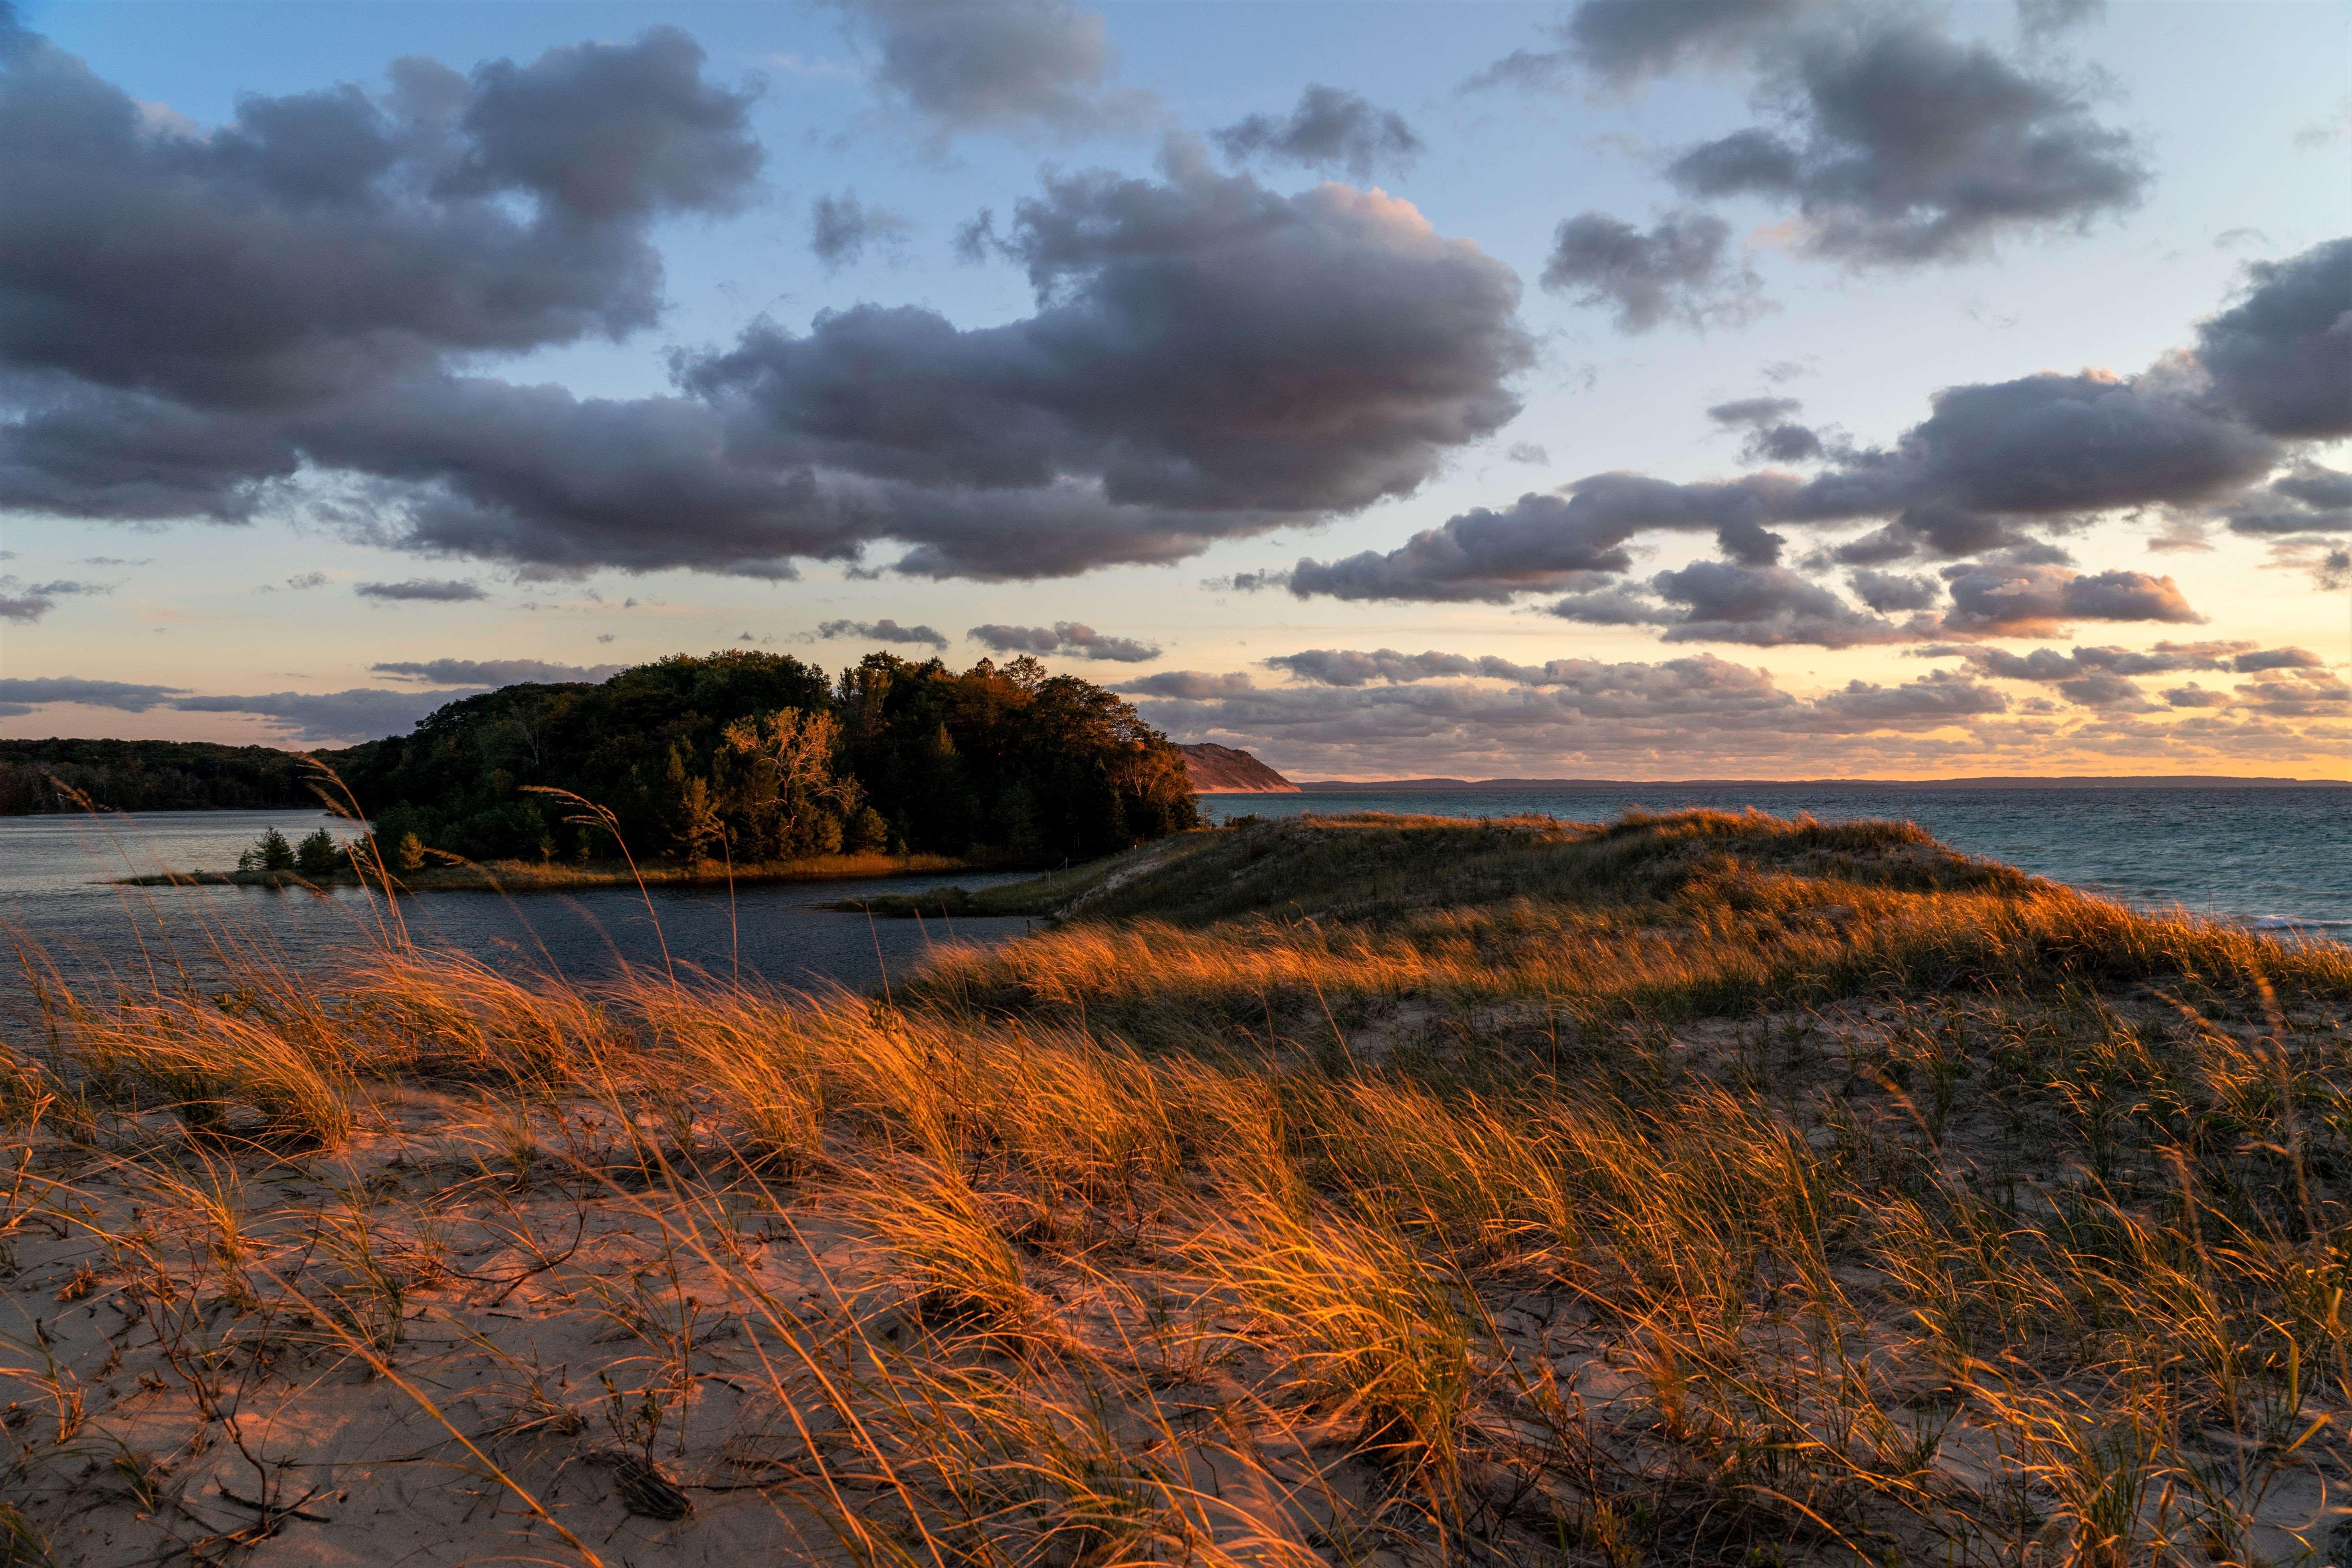 Dunes at sunset surrounded by two lakes